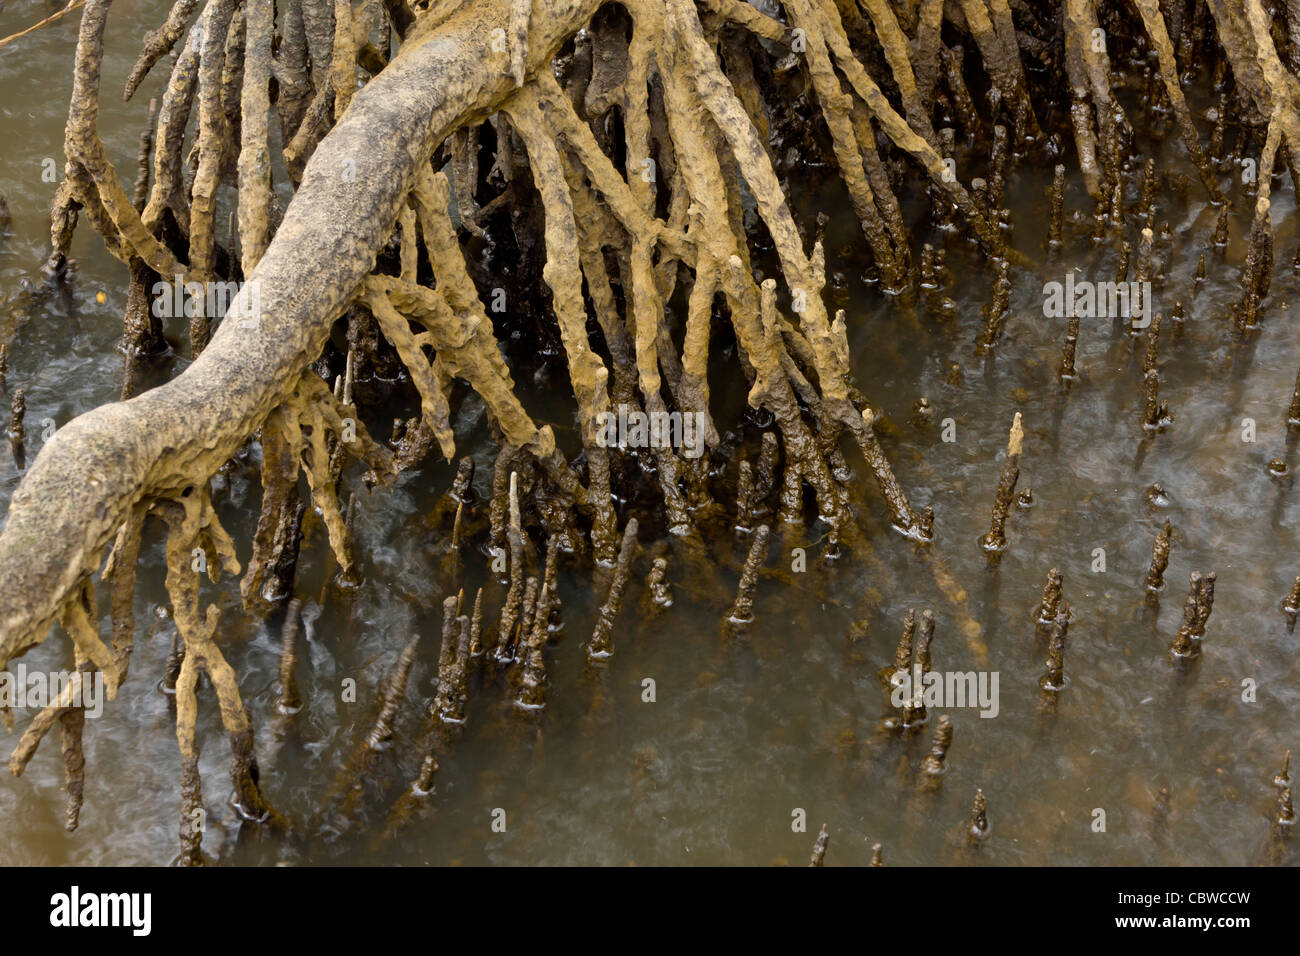 Mangrove roots develop spiky Pneumatophores, which help it breathe in the swampy conditions. Stock Photo